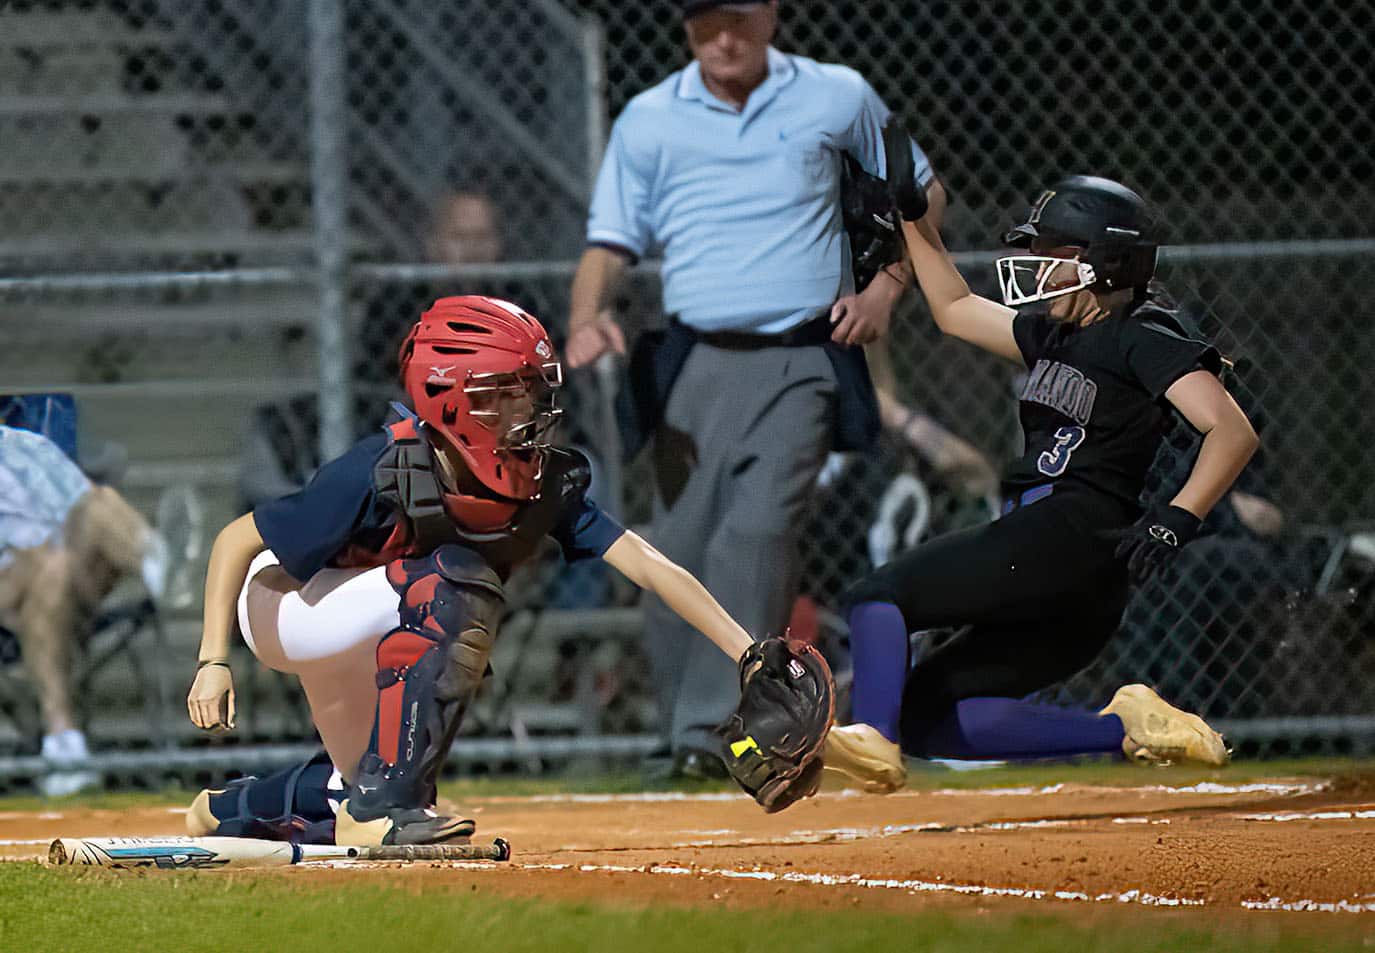 Hernando High ,3, Aryanna Eliopoulos slides into home just ahead of a tag attempt by Springstead catcher, Rachel Rivera Thursday at Springstead High. Photo by JOE DiCRISTOFALO